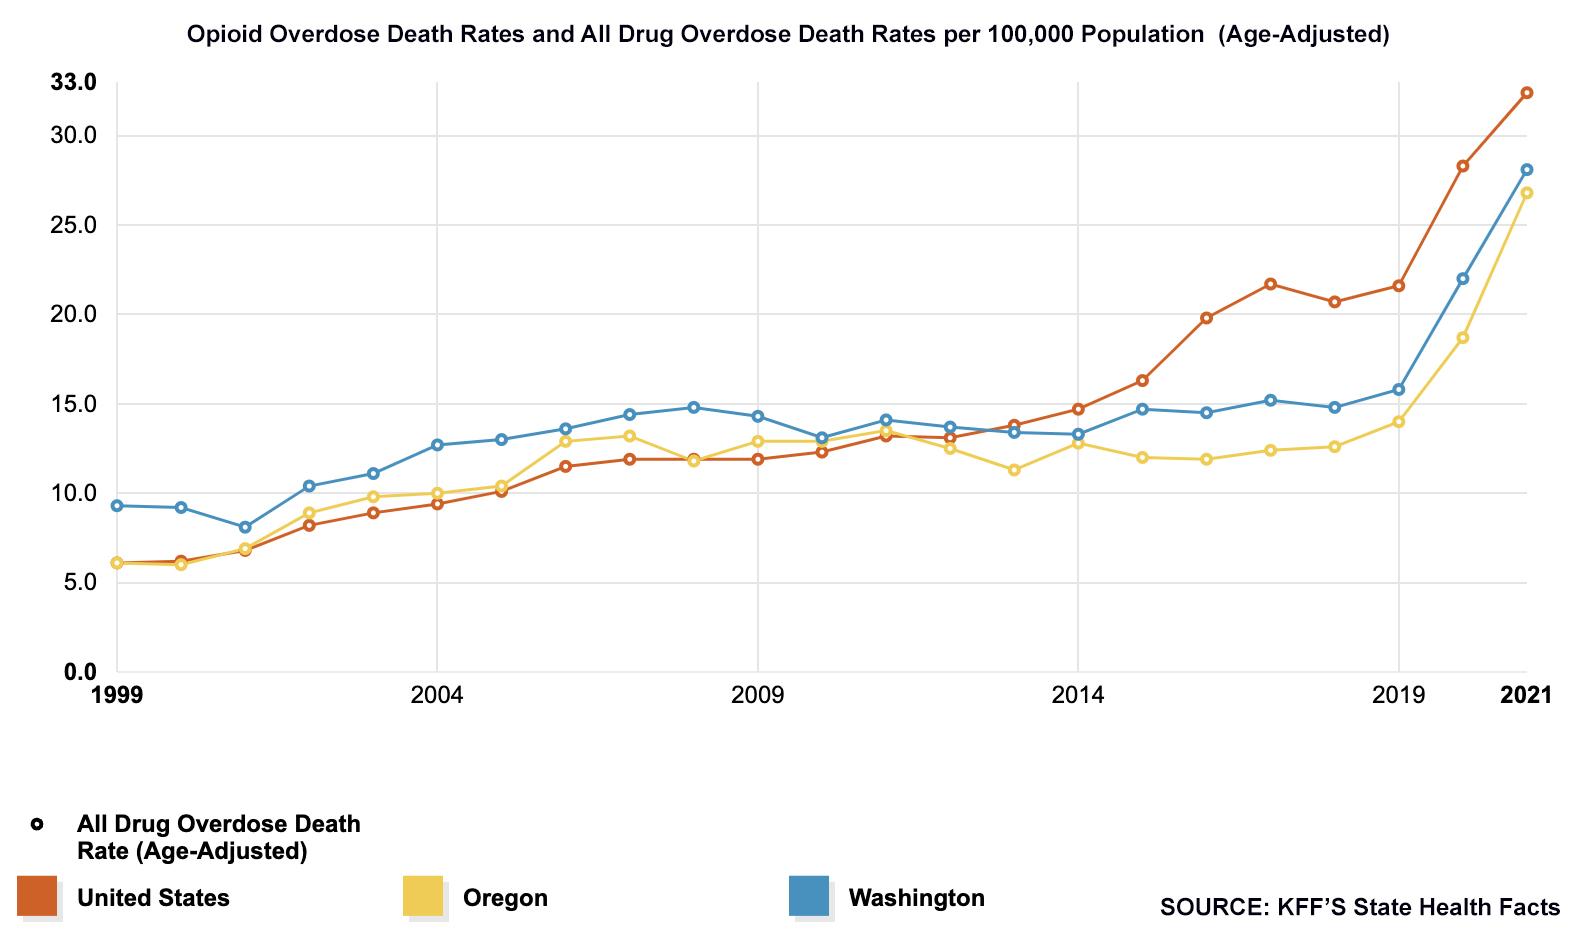 Drug overdose rates for from 1999-2021, comparing the United States, Washington and Oregon. Data includes deaths from legally prescribed and illegally-made fentanyl, and is based on Kaiser Family Foundation analysis from the CDC and National Center for Health Statistics.